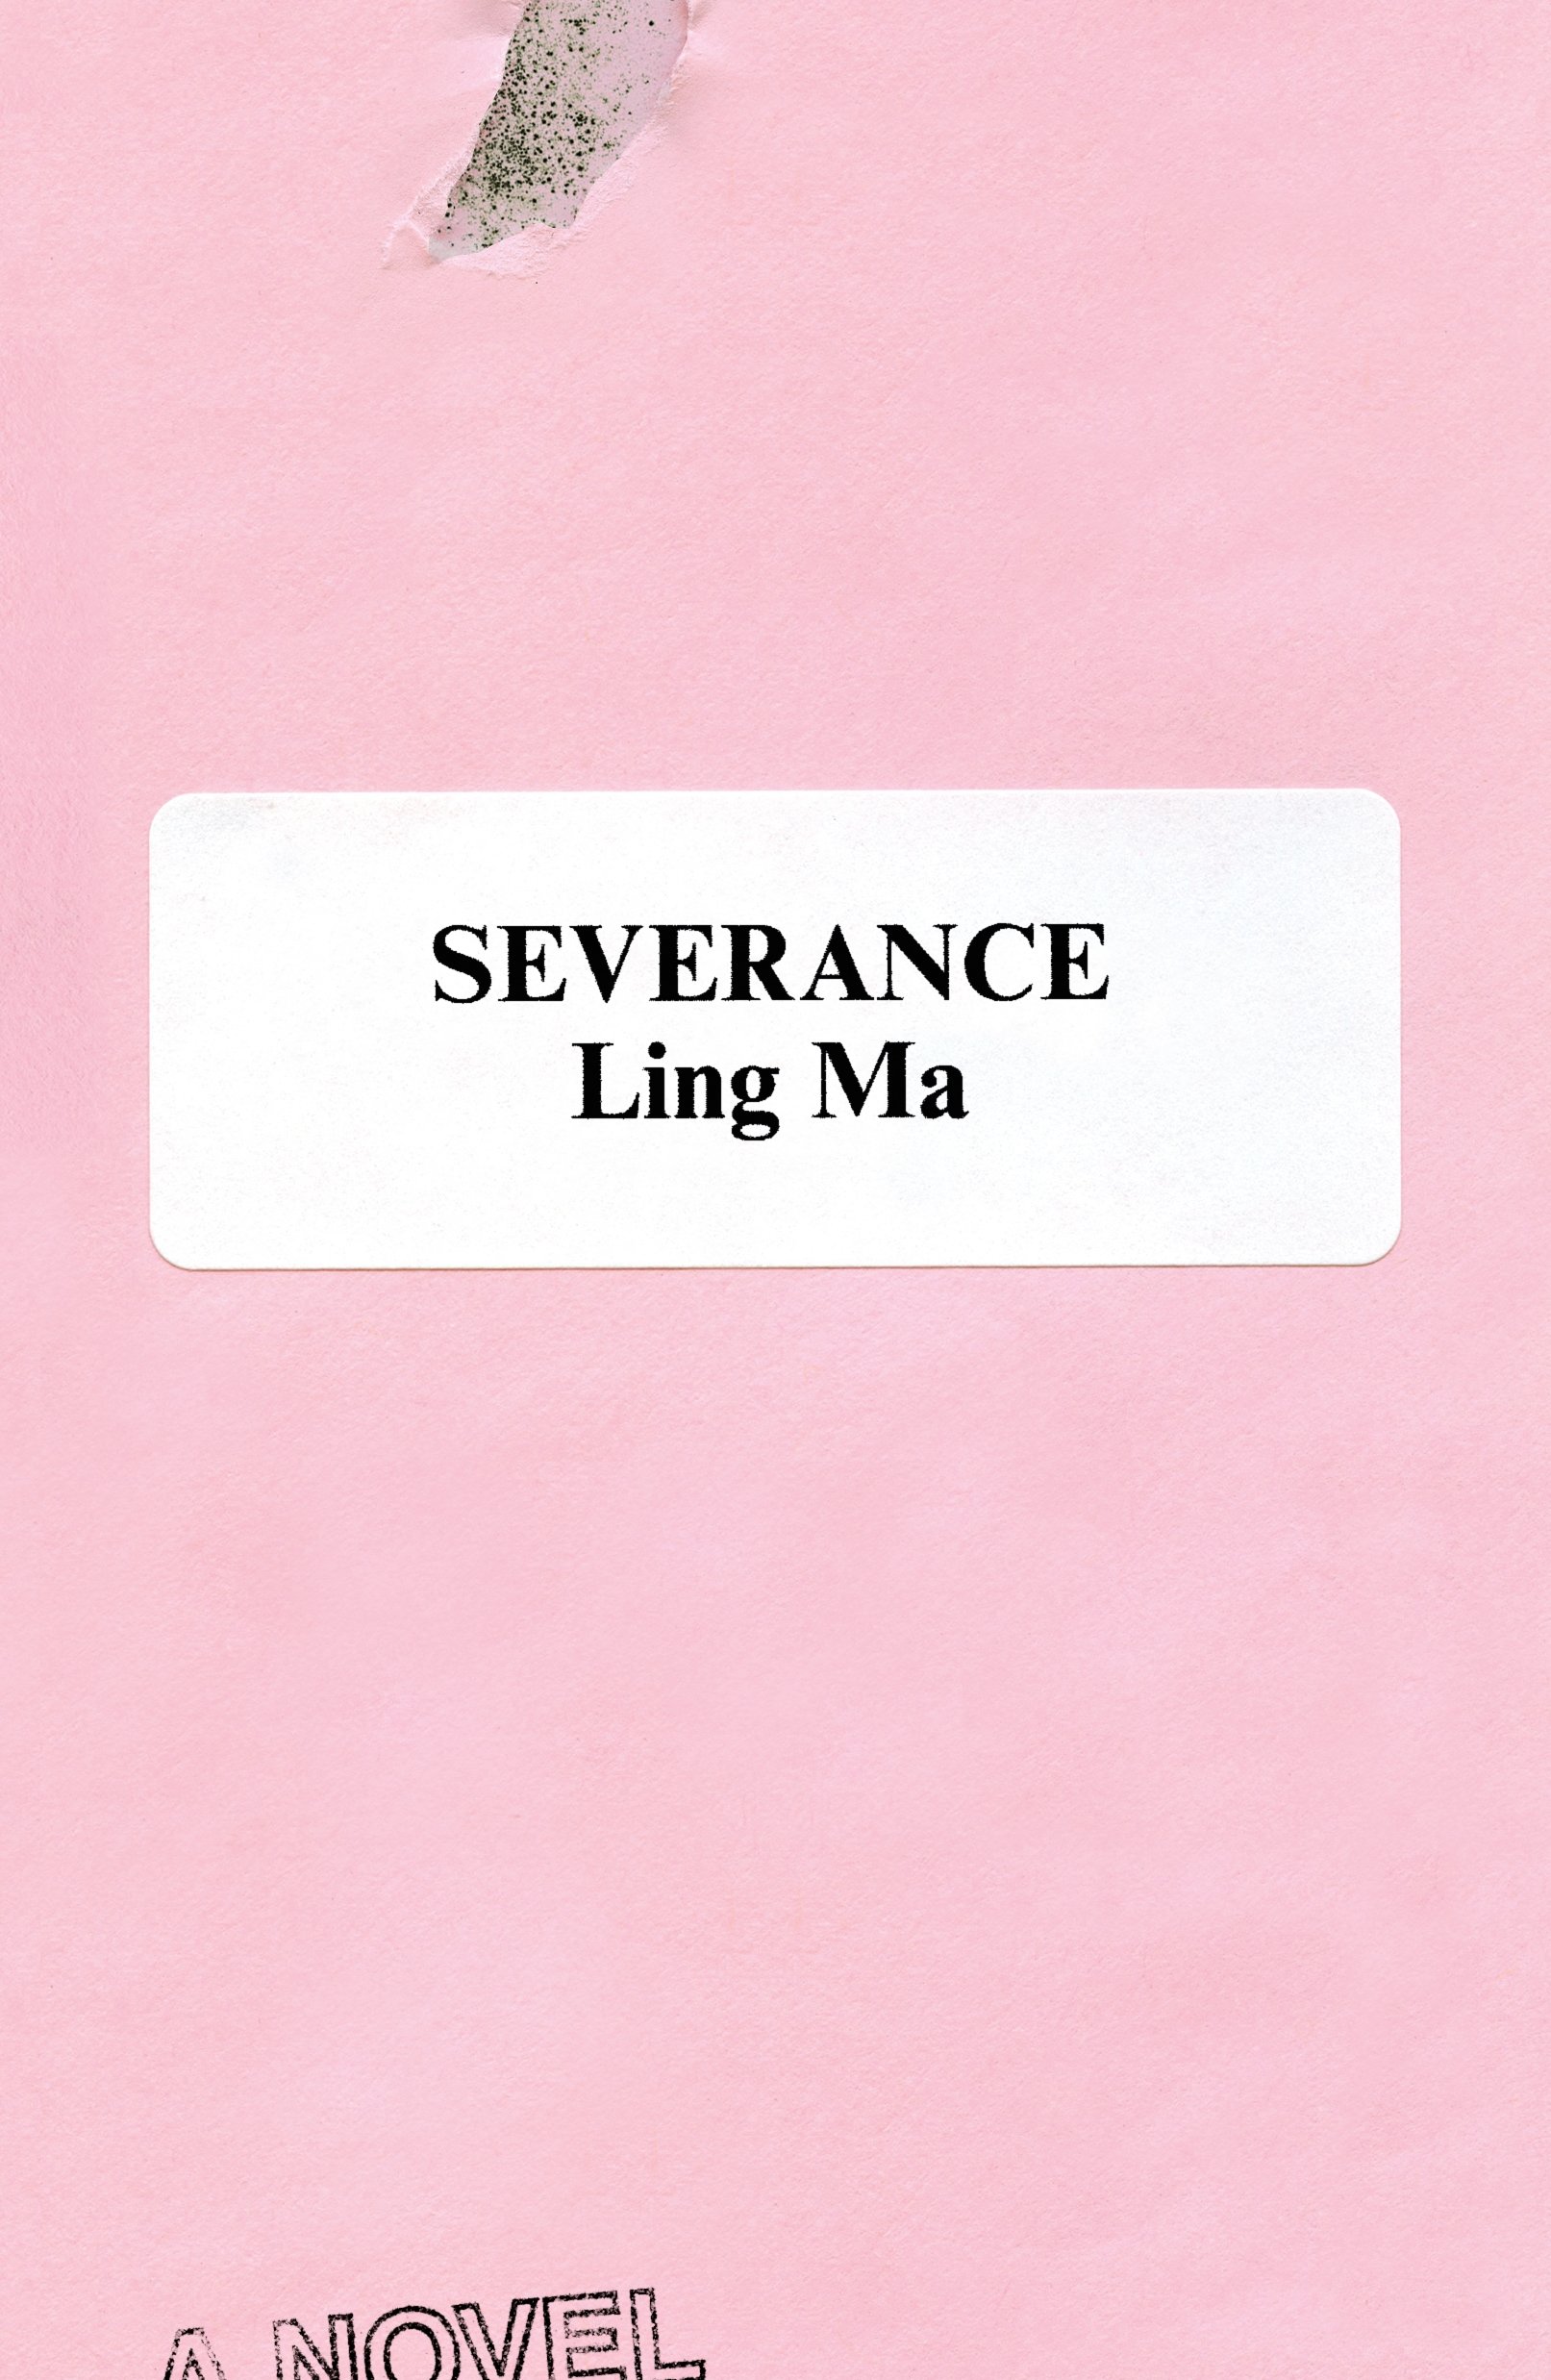 Image result for severance ling ma